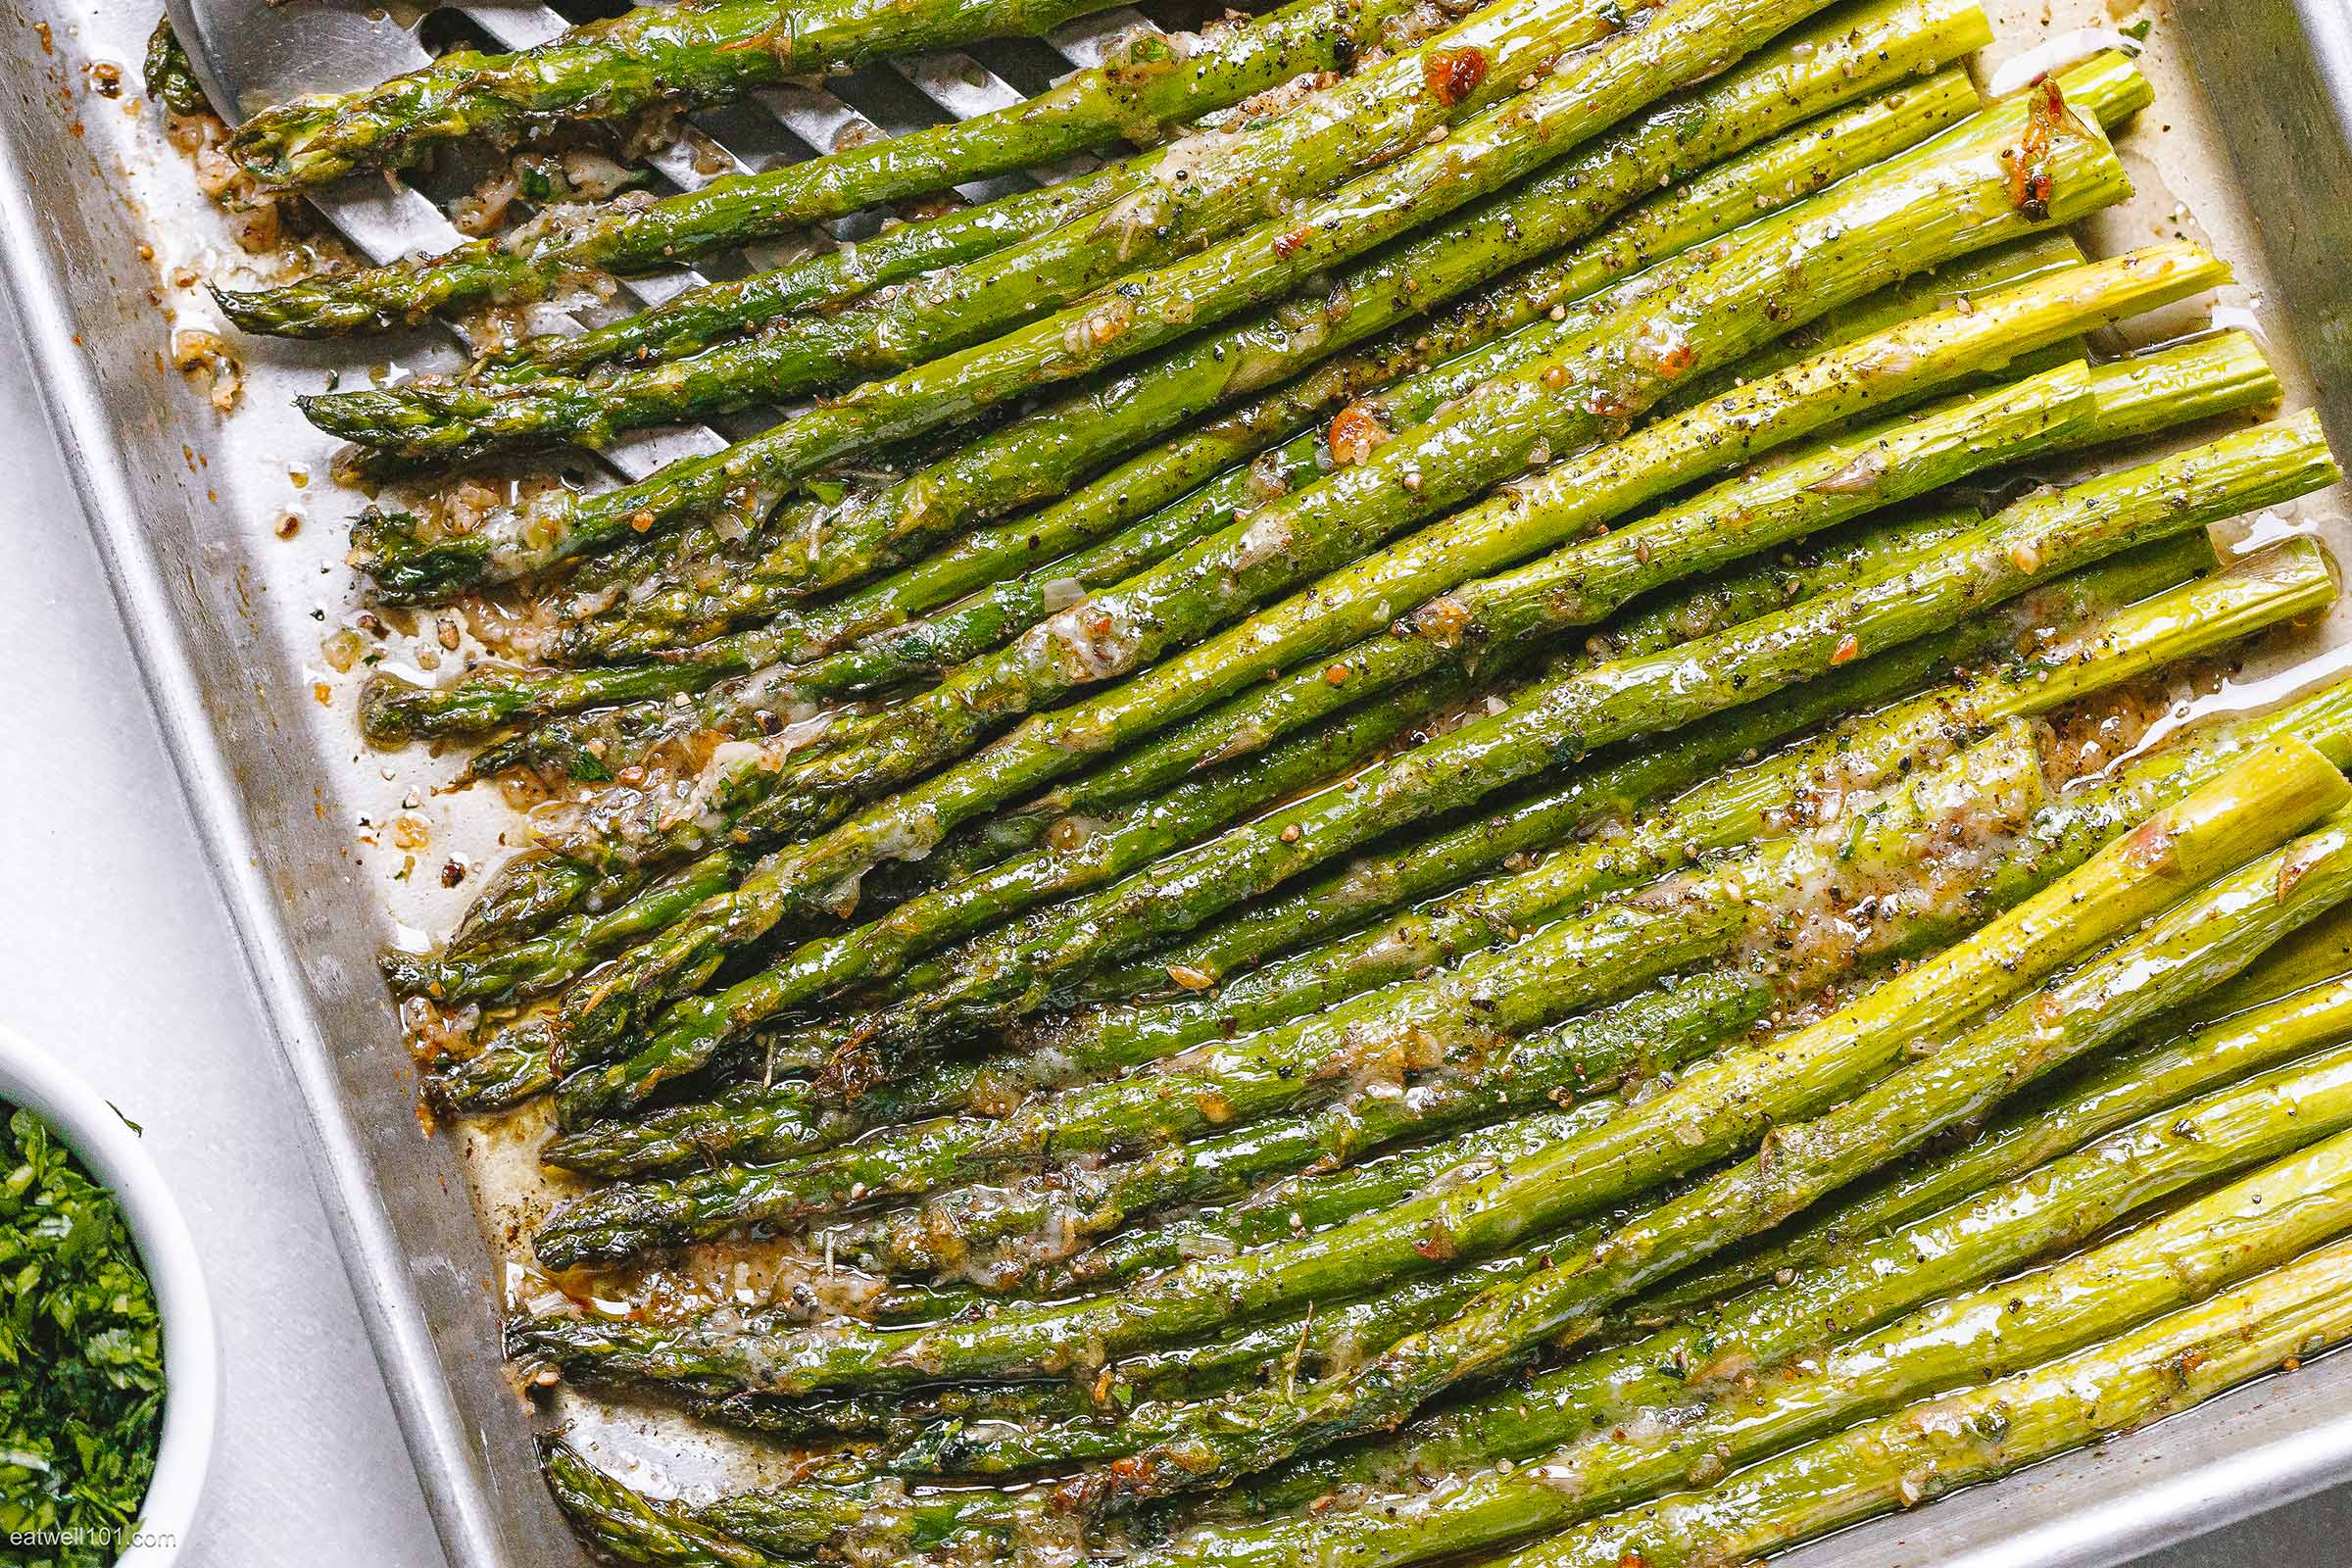 Oven-Roasted Asparagus with Garlic Parmesan